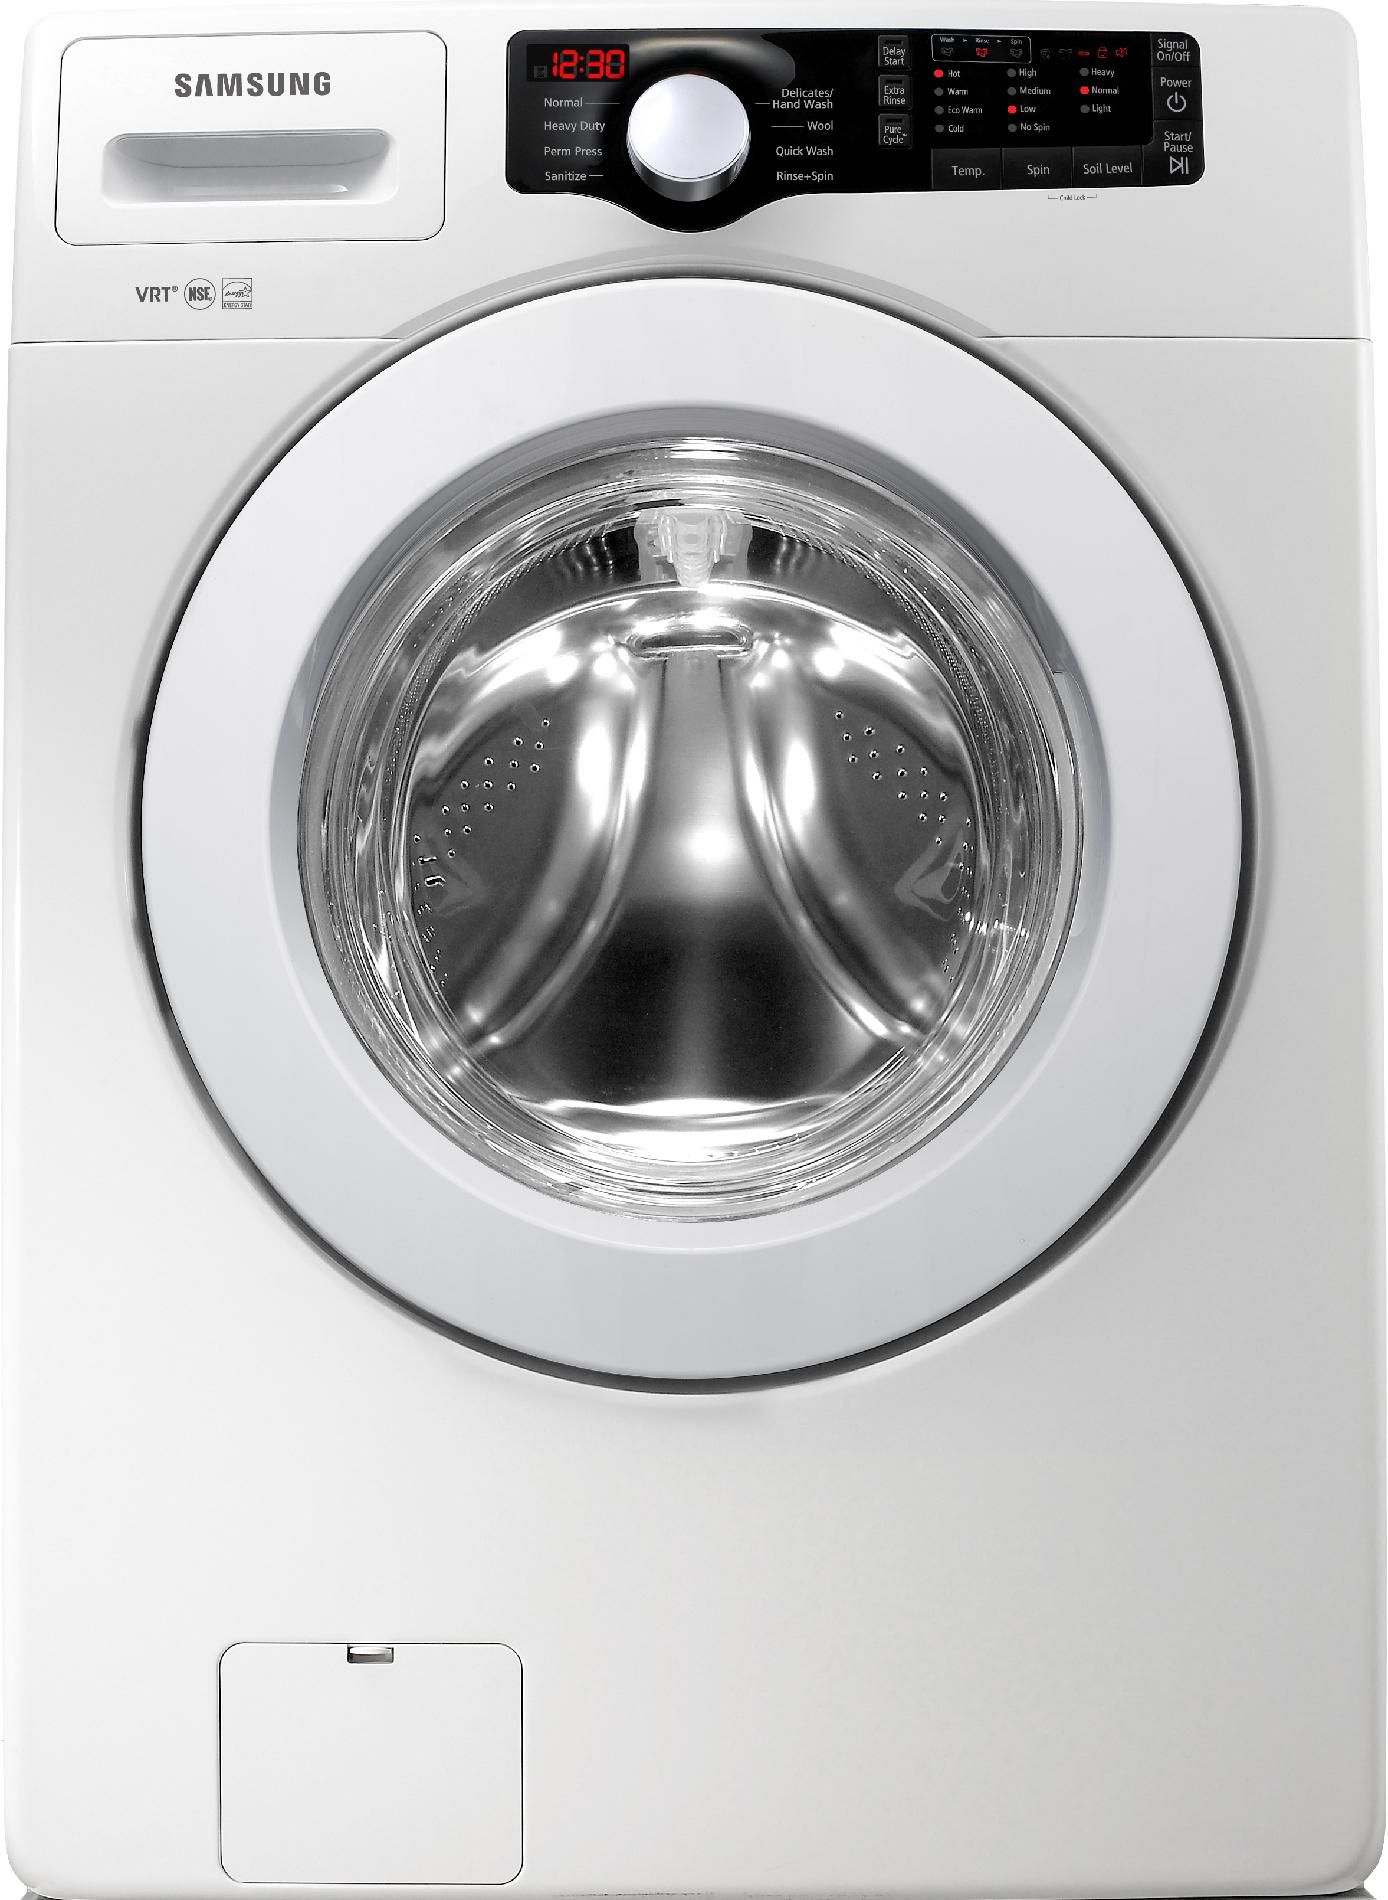 Samsung 3.6 cu. ft. Front-Load Washer - White